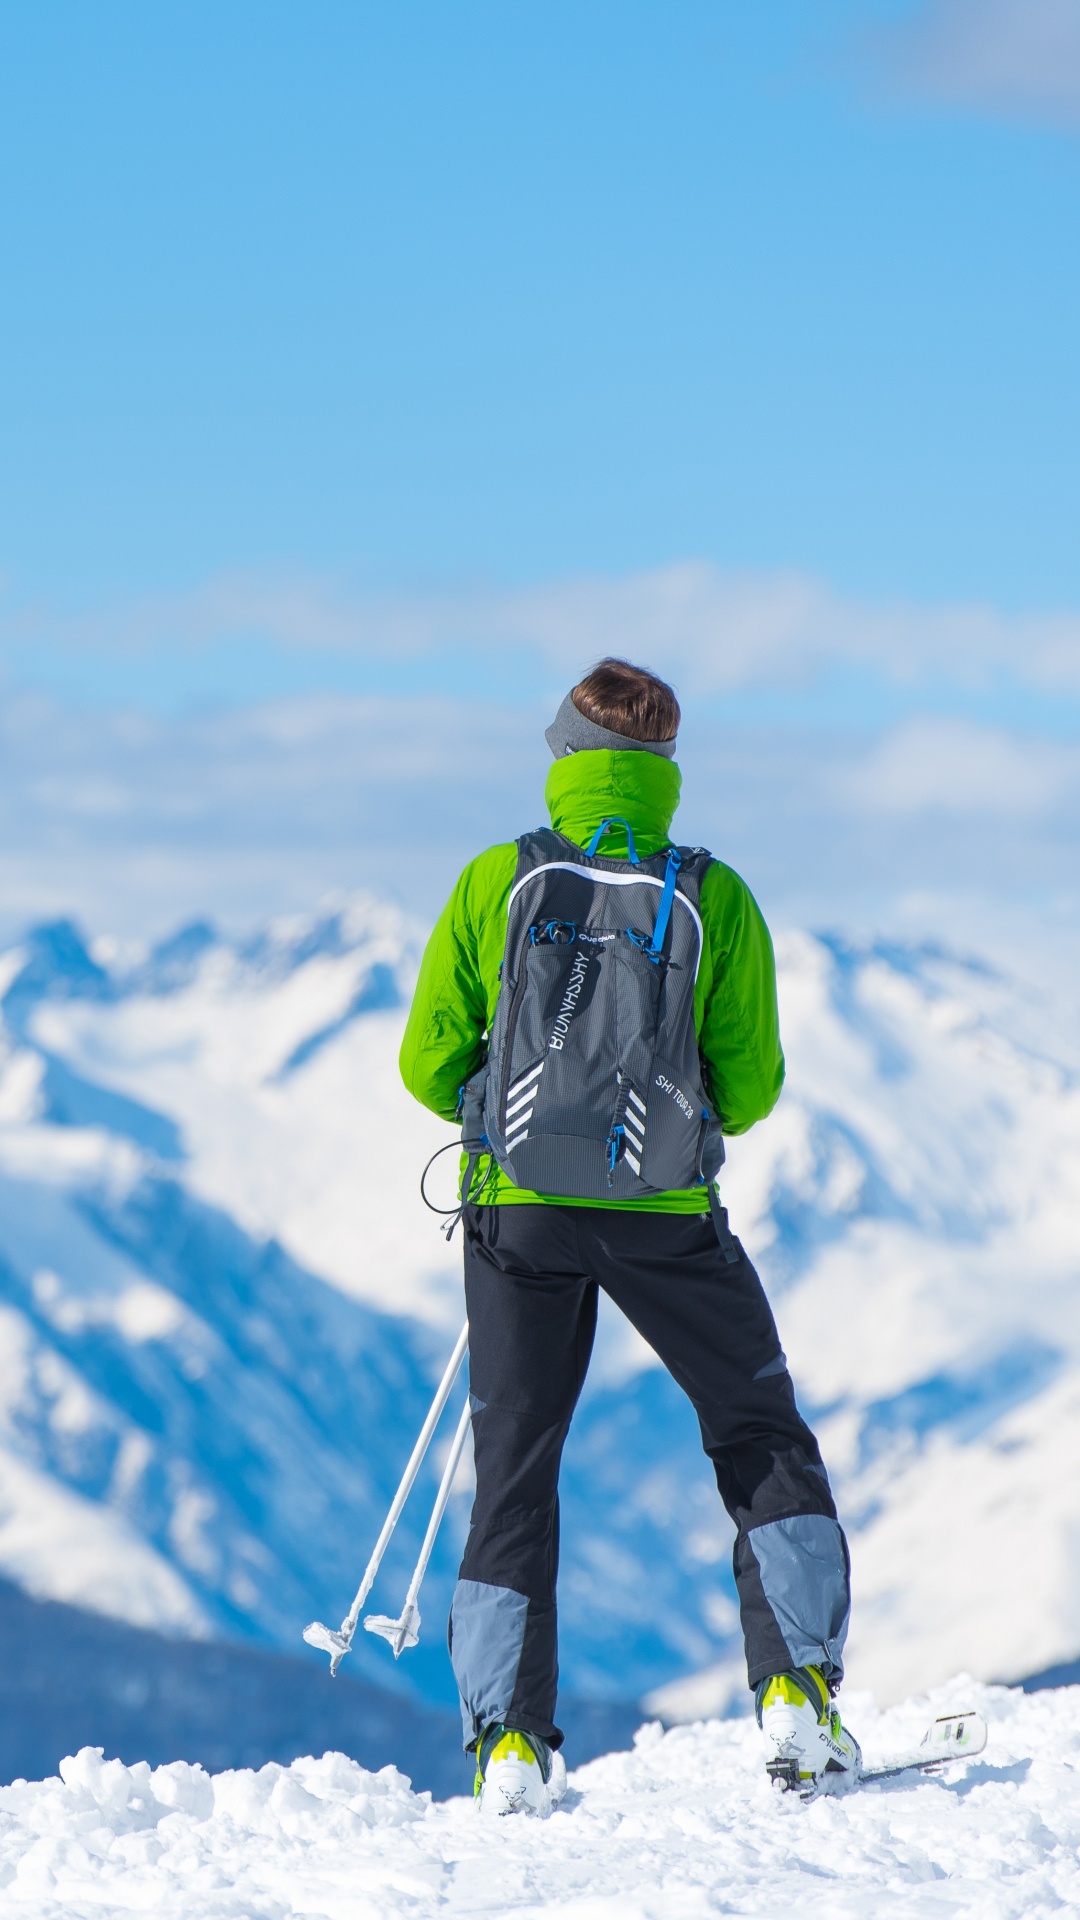 Man in Green Jacket and Black Pants Standing on Snow Covered Ground During Daytime. Wallpaper in 1080x1920 Resolution